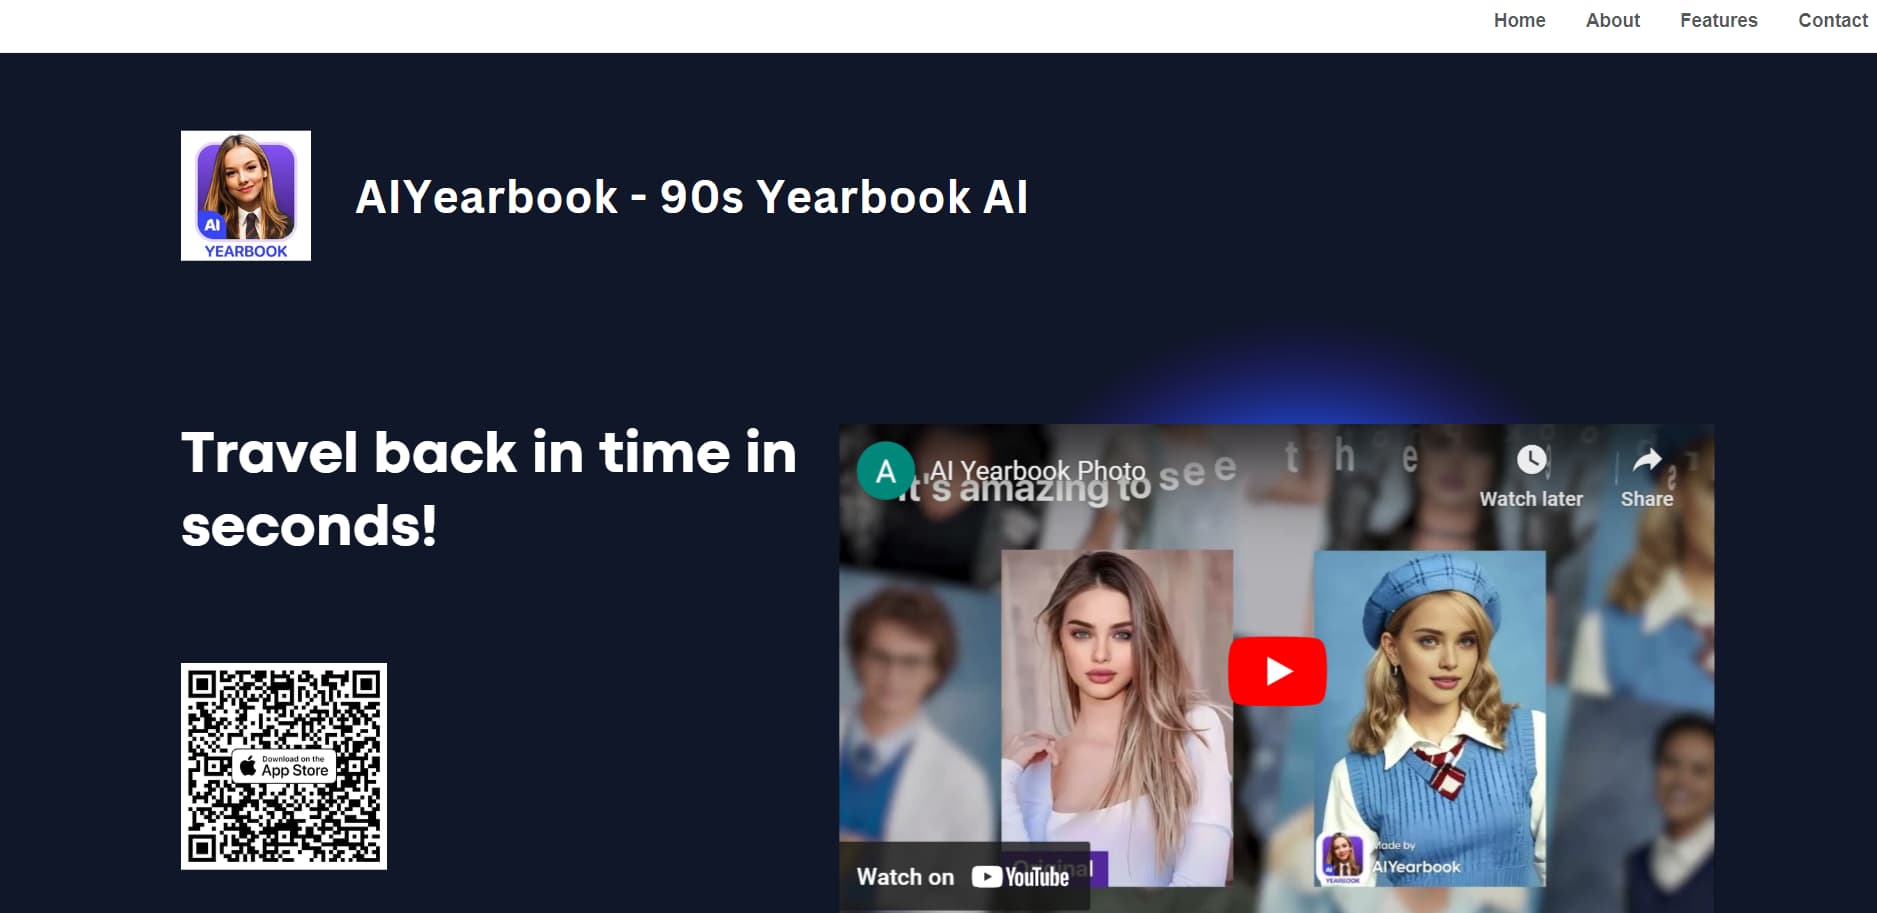 AIYearbook